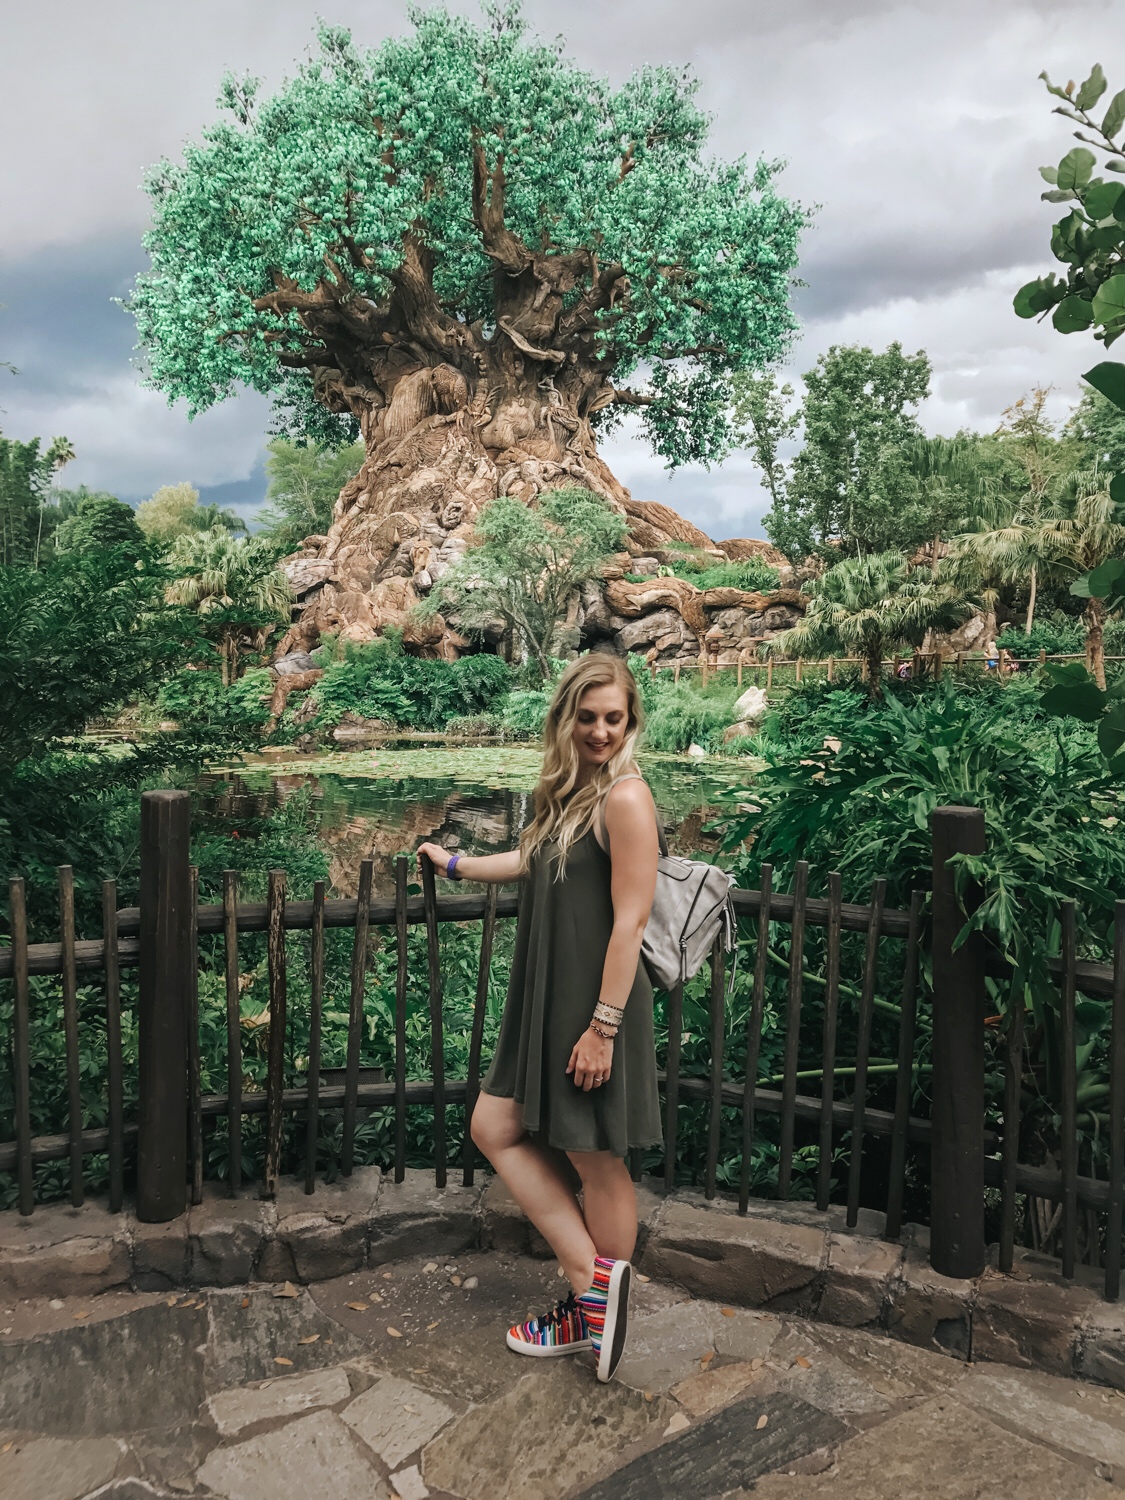 At Animal Kingdom Tree of Life wearing an olive shift dress, ISKAY colorful handmade shoes, @kutukakiss bracelets, and @violetrayny backpack.